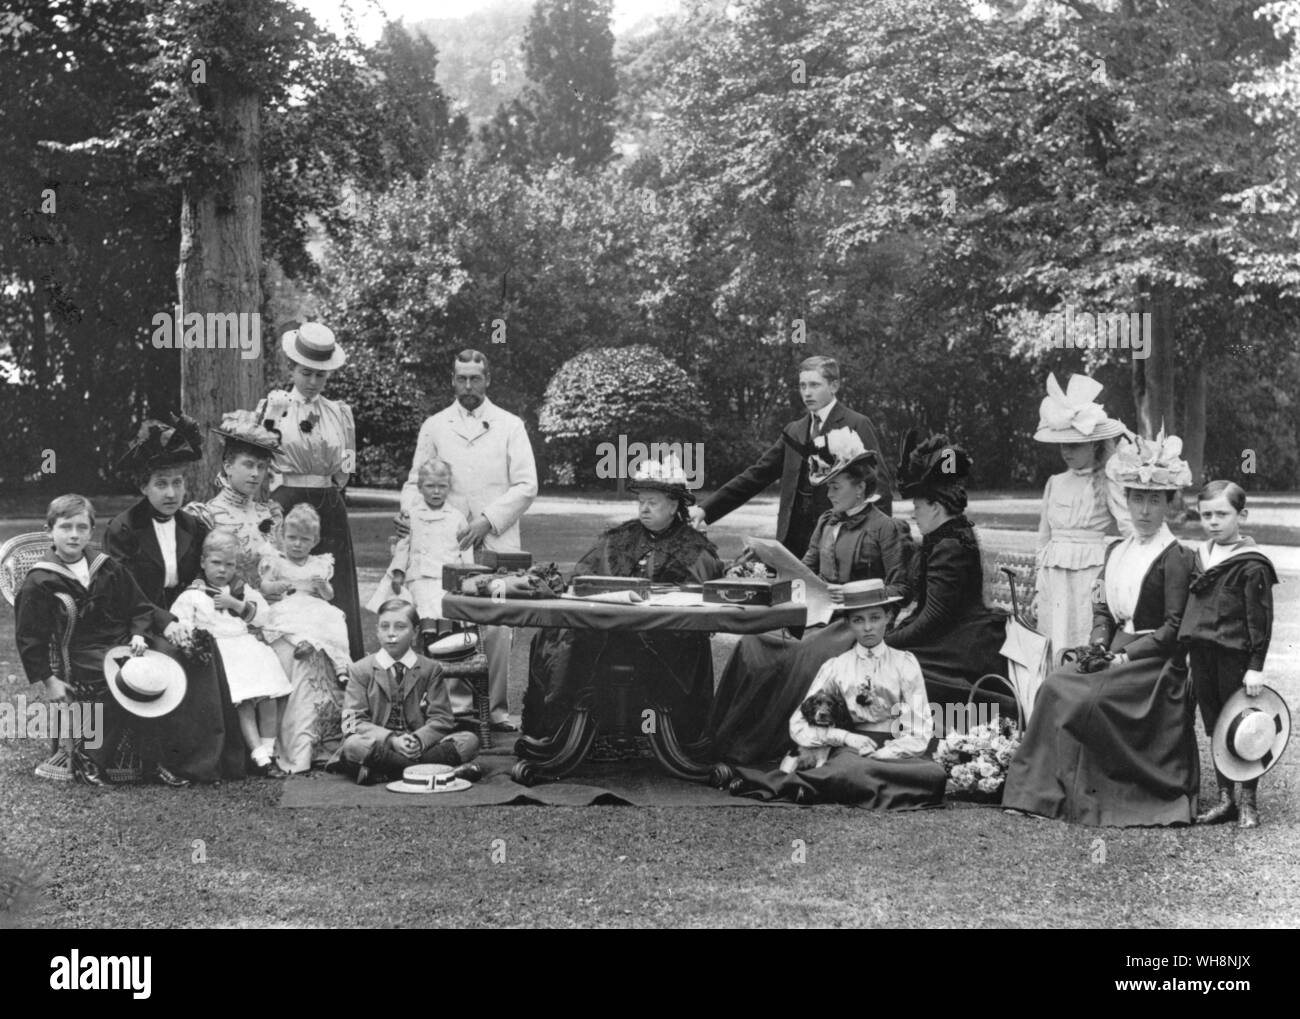 Royal Group at Osborne August 1898 left to right. Prince Leopold of Battenberg, Princess Aribert of Anhalt, Prince Edward of York, Duchess of York with Princess Mary of York, Princess Margaret of Connaught, Prince Alexander of Battenberg (on ground) Duke of York, with Prince Albert of York ( later George VI) , Queen Victoria, Prince Arthur of Connaught, Duchess of Connuaght, Princess Patricia of Connaught (with dogs) Princess Henry of Battenberg, Princess Victoria Eugenie of Battenberg, Princess Helena Victoria of Schleswig, Holstein, Prince Maurice of Battenberg Stock Photo